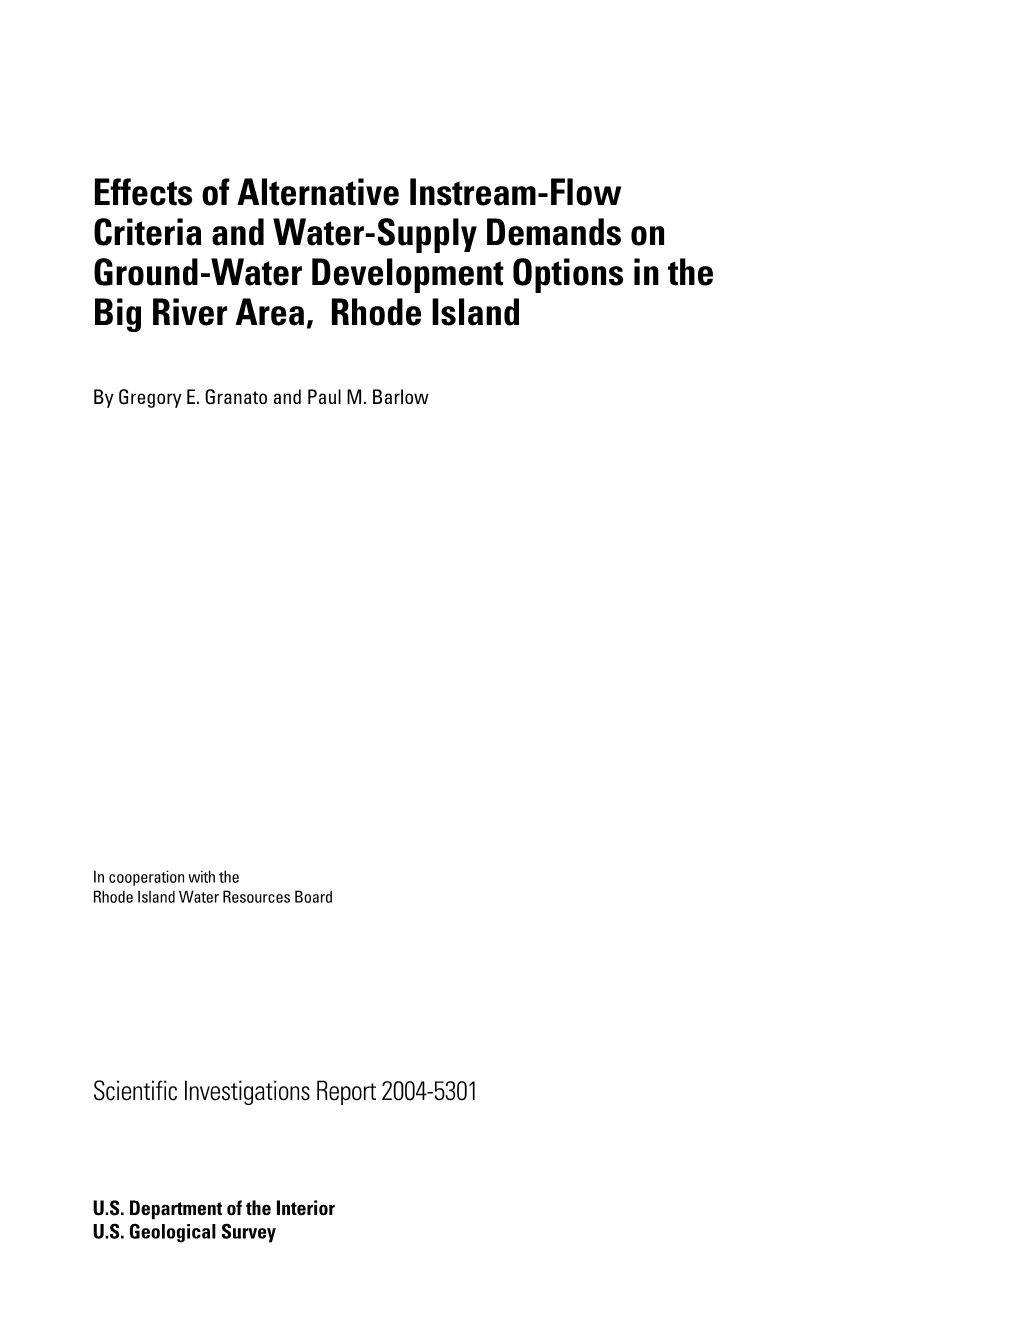 Effects of Alternative Instream-Flow Criteria and Water-Supply Demands on Ground-Water Development Options in the Big River Area, Rhode Island